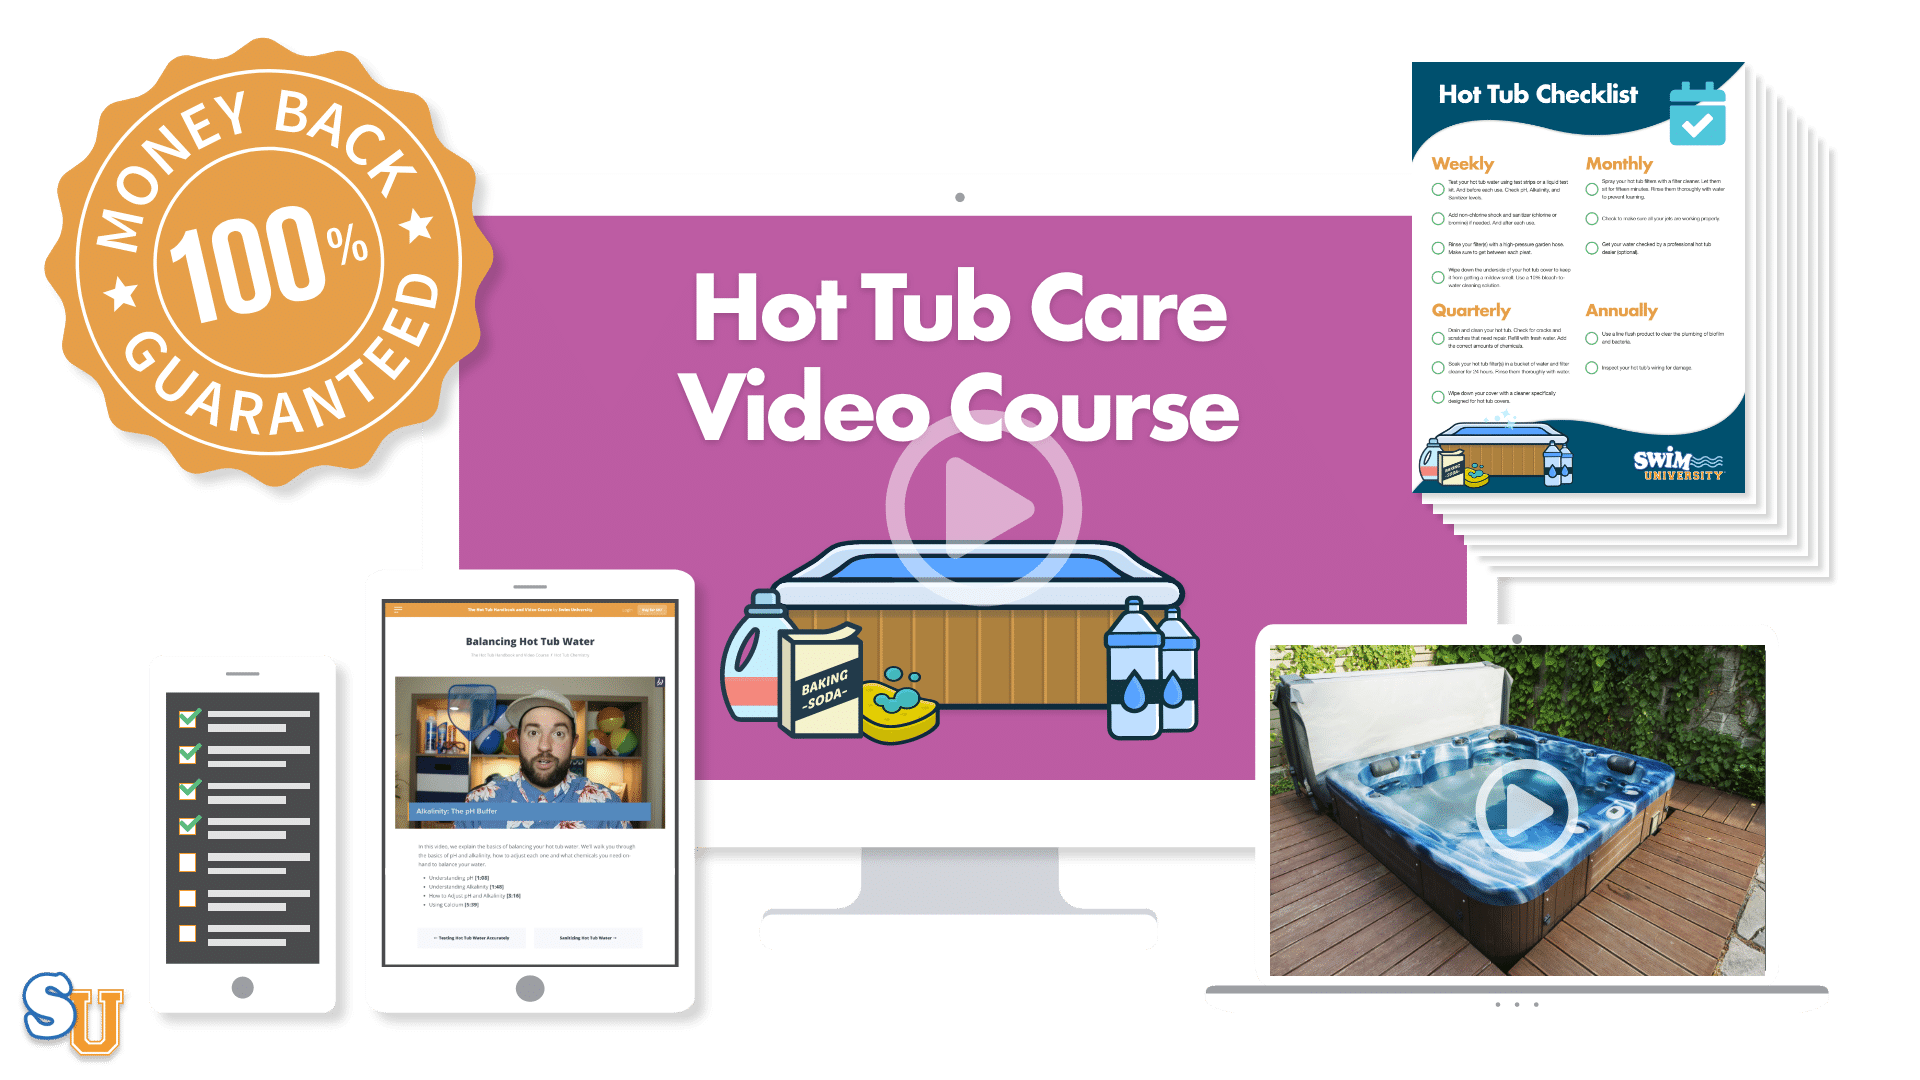 The Hot Tub Care Video Course Package